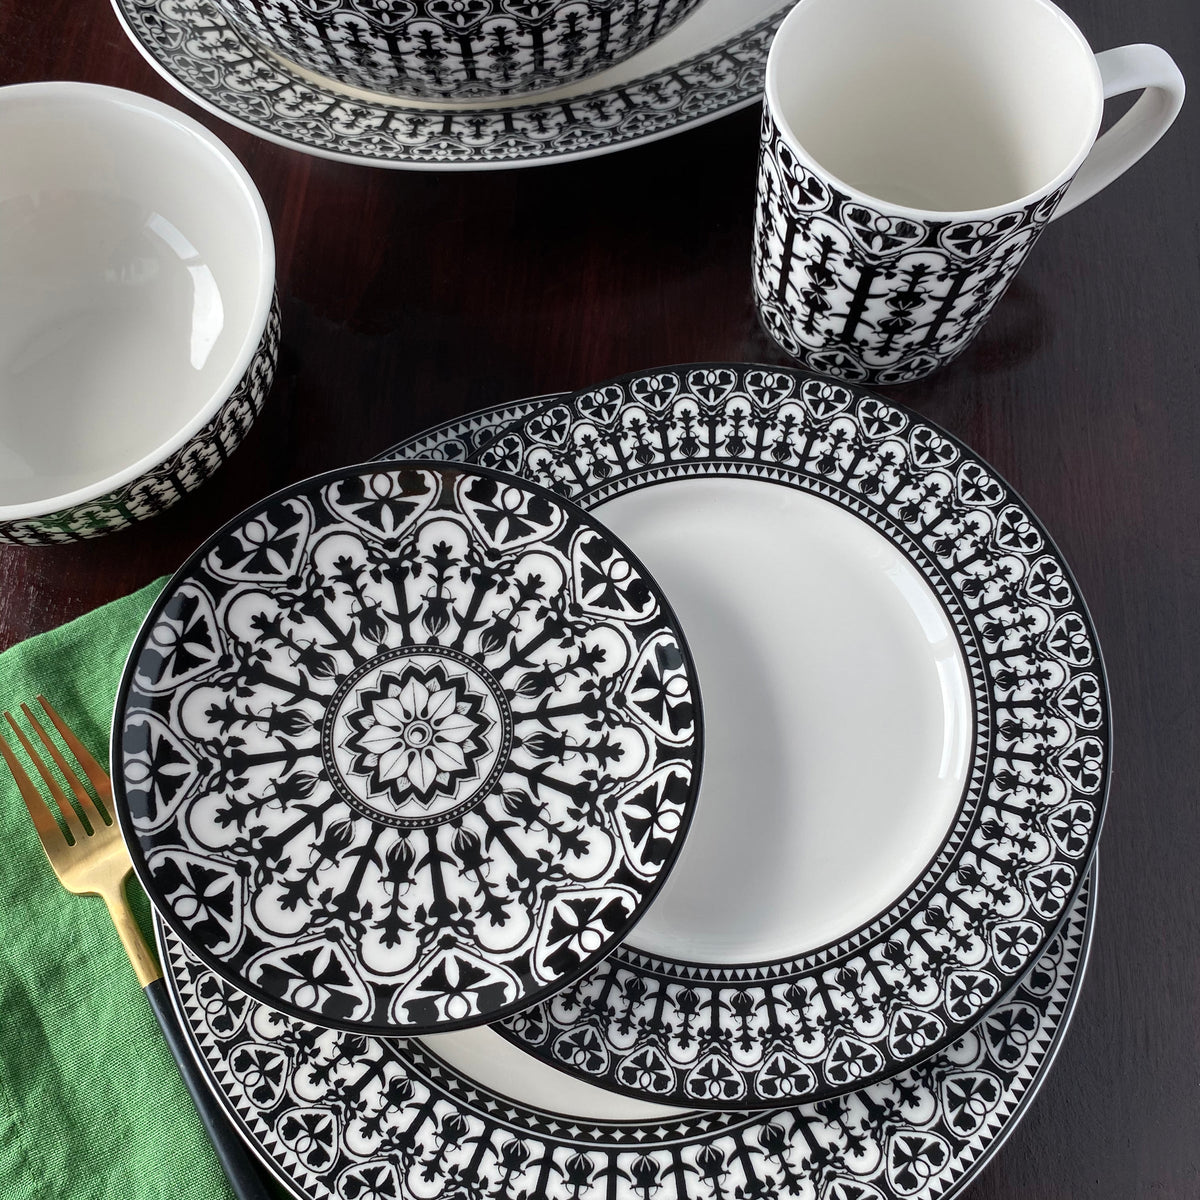 A Casablanca Black Rimmed Dinner Plate set by Caskata Artisanal Home featuring both black and white dinner plates displayed on a table.